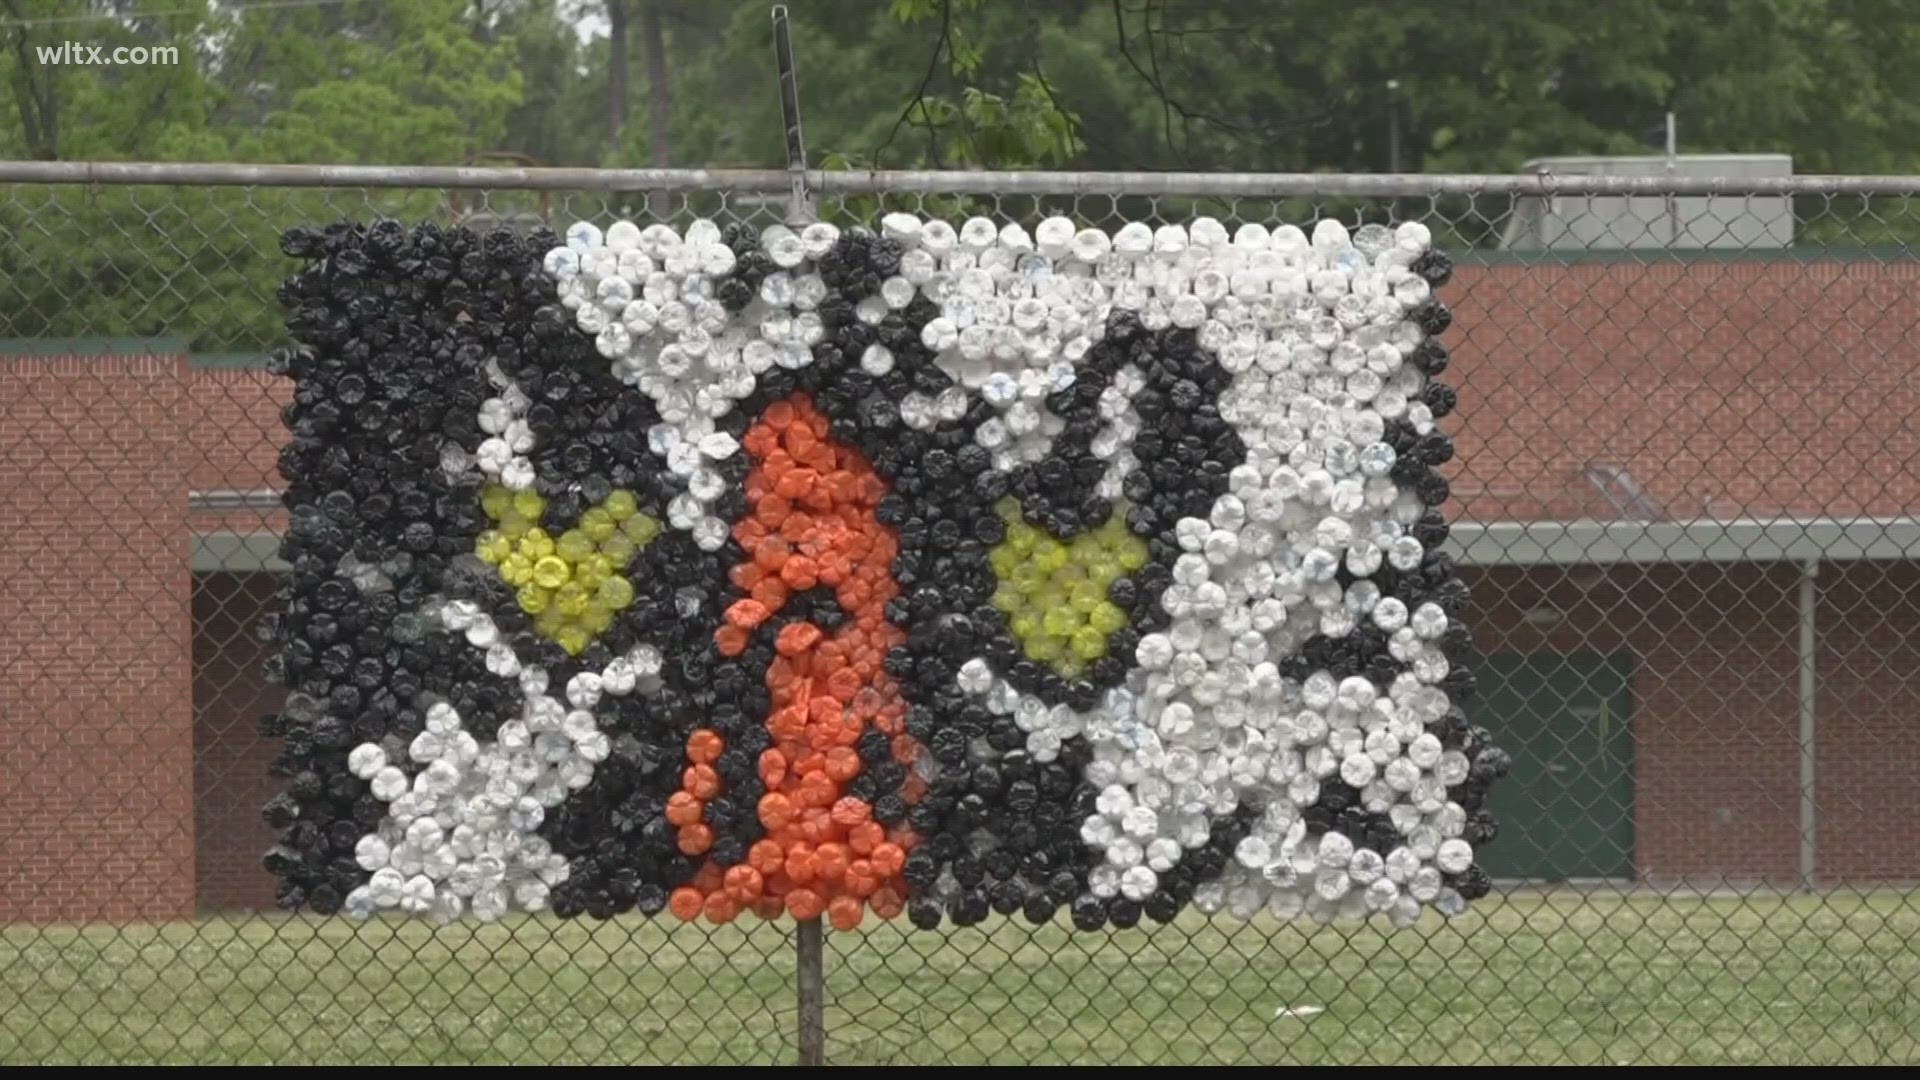 Students from six schools repurposed thousand of water bottles to bring the vision to life.